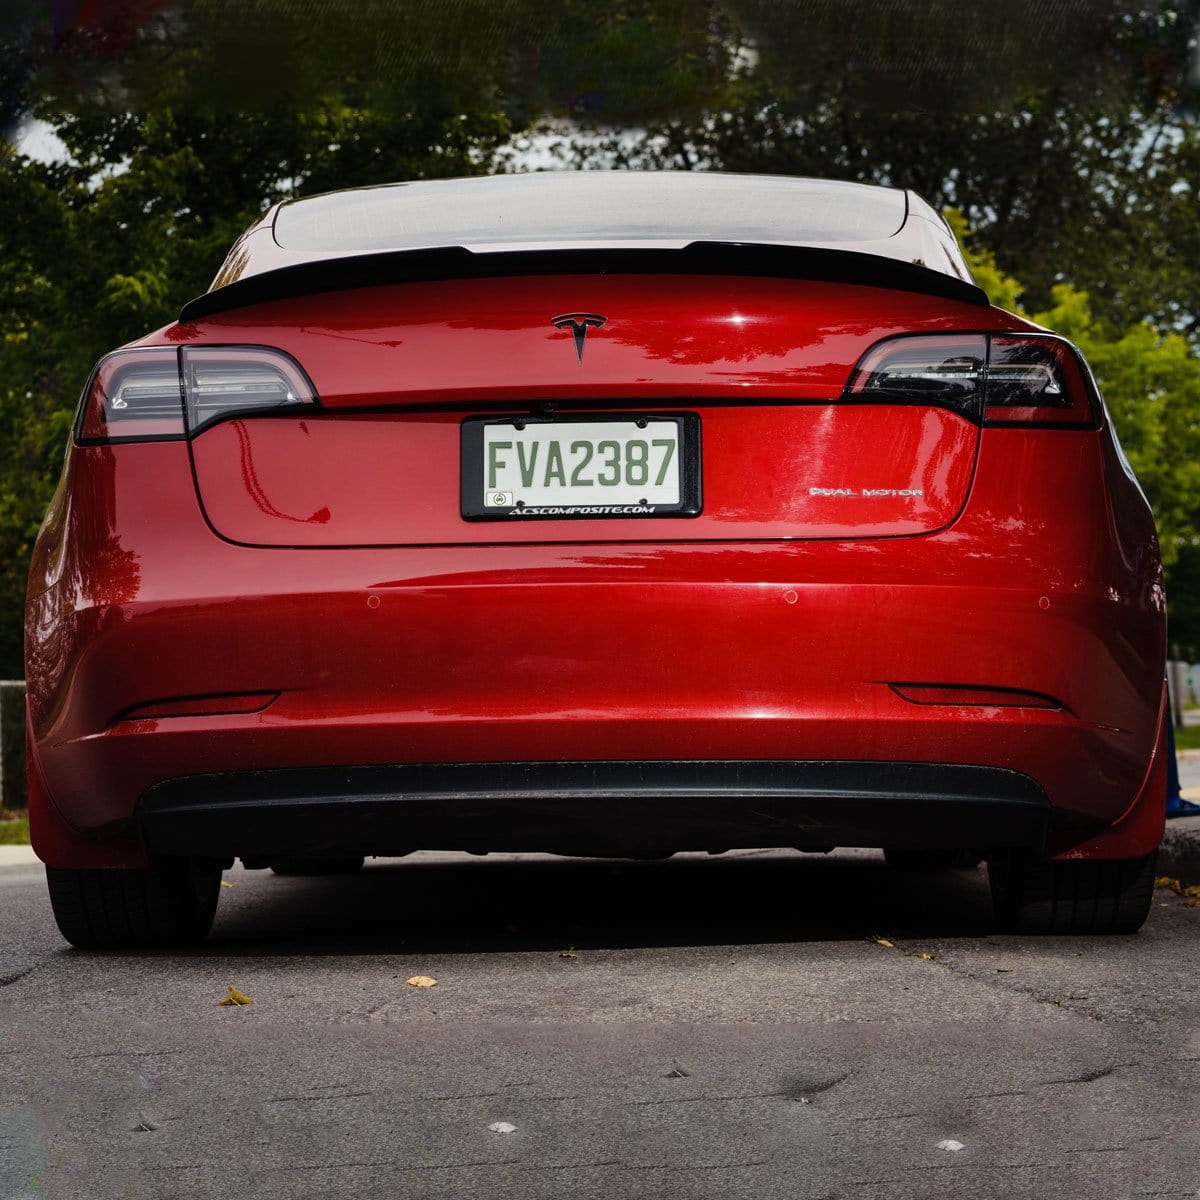 ACS Composite M3 Spoiler in Gloss Black for Tesla Model 3, SKU 51-4-001, enhances sporty appearance with downforce wickers and easy installation.